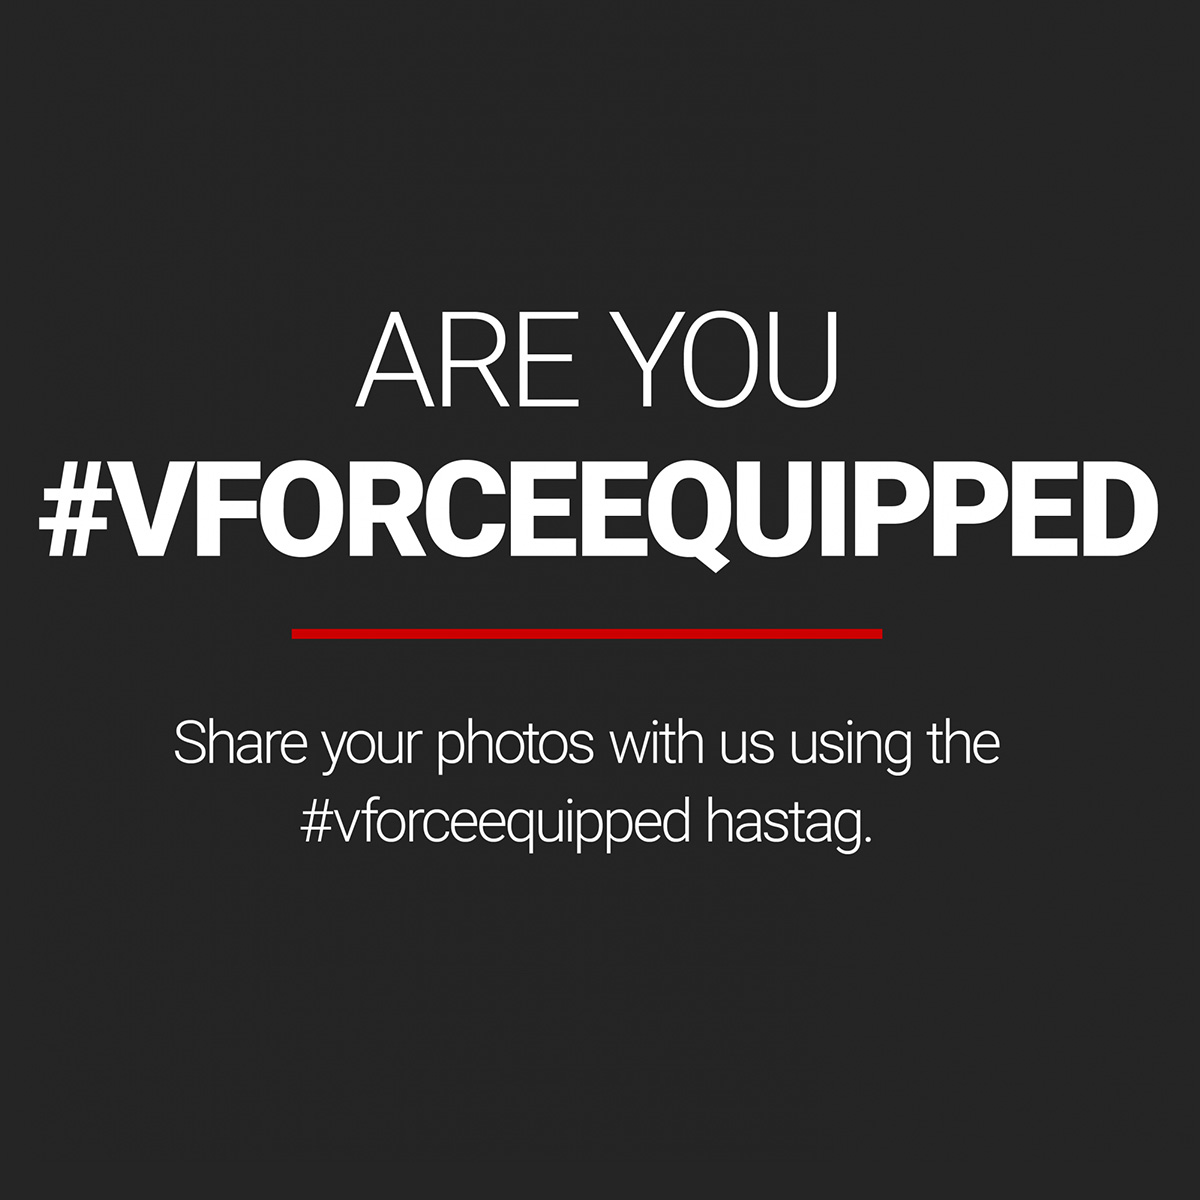 Are you VFORCE EQUIPPED? Let us know.